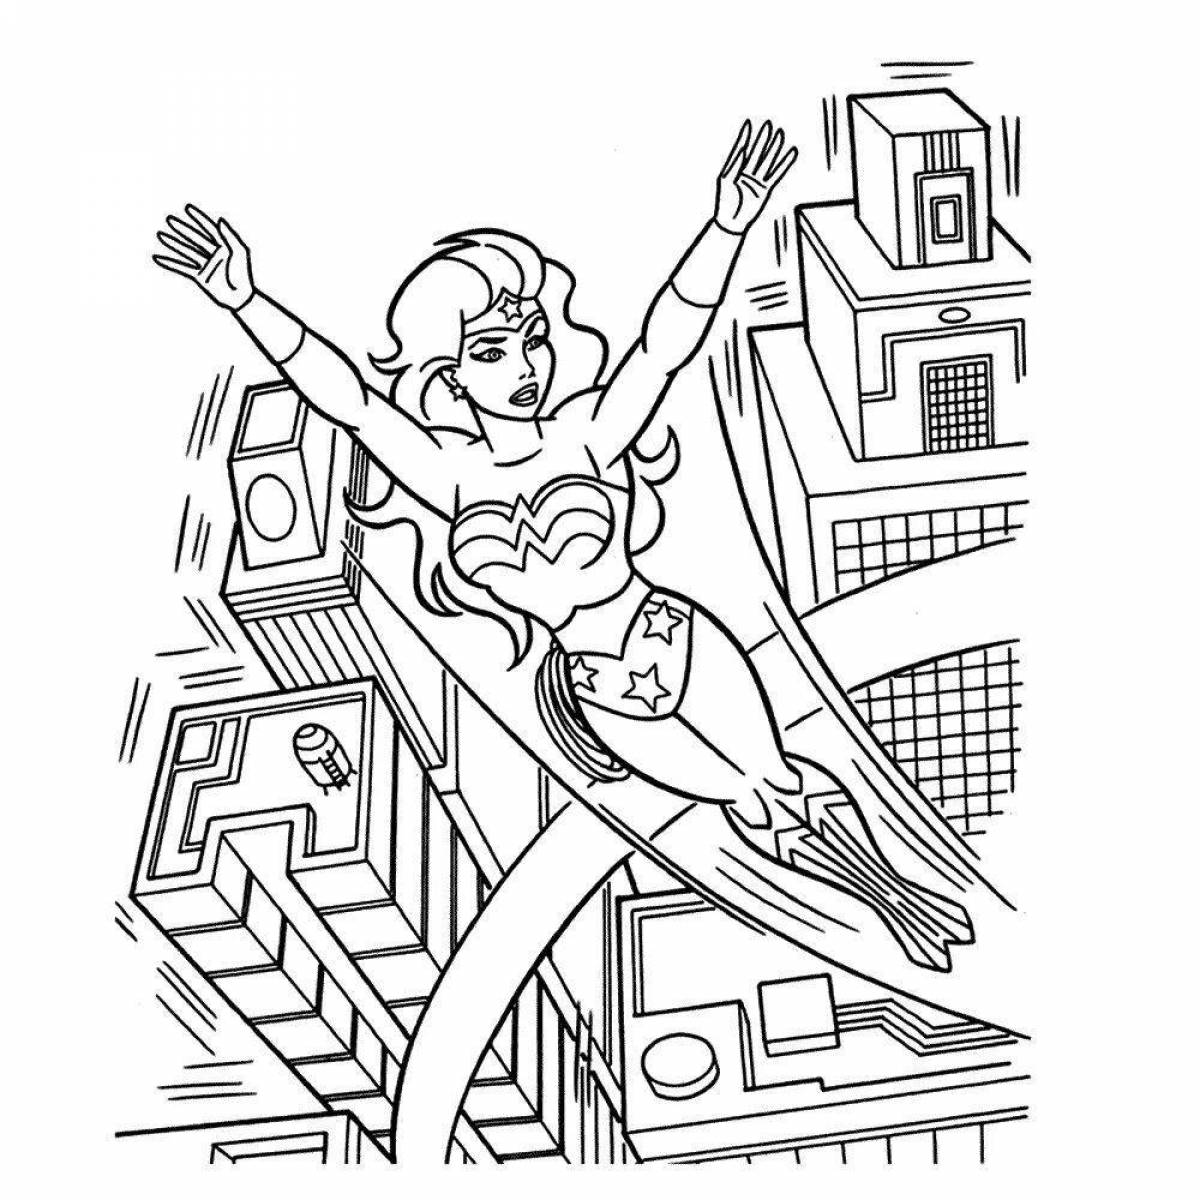 Flawless Superwoman coloring page